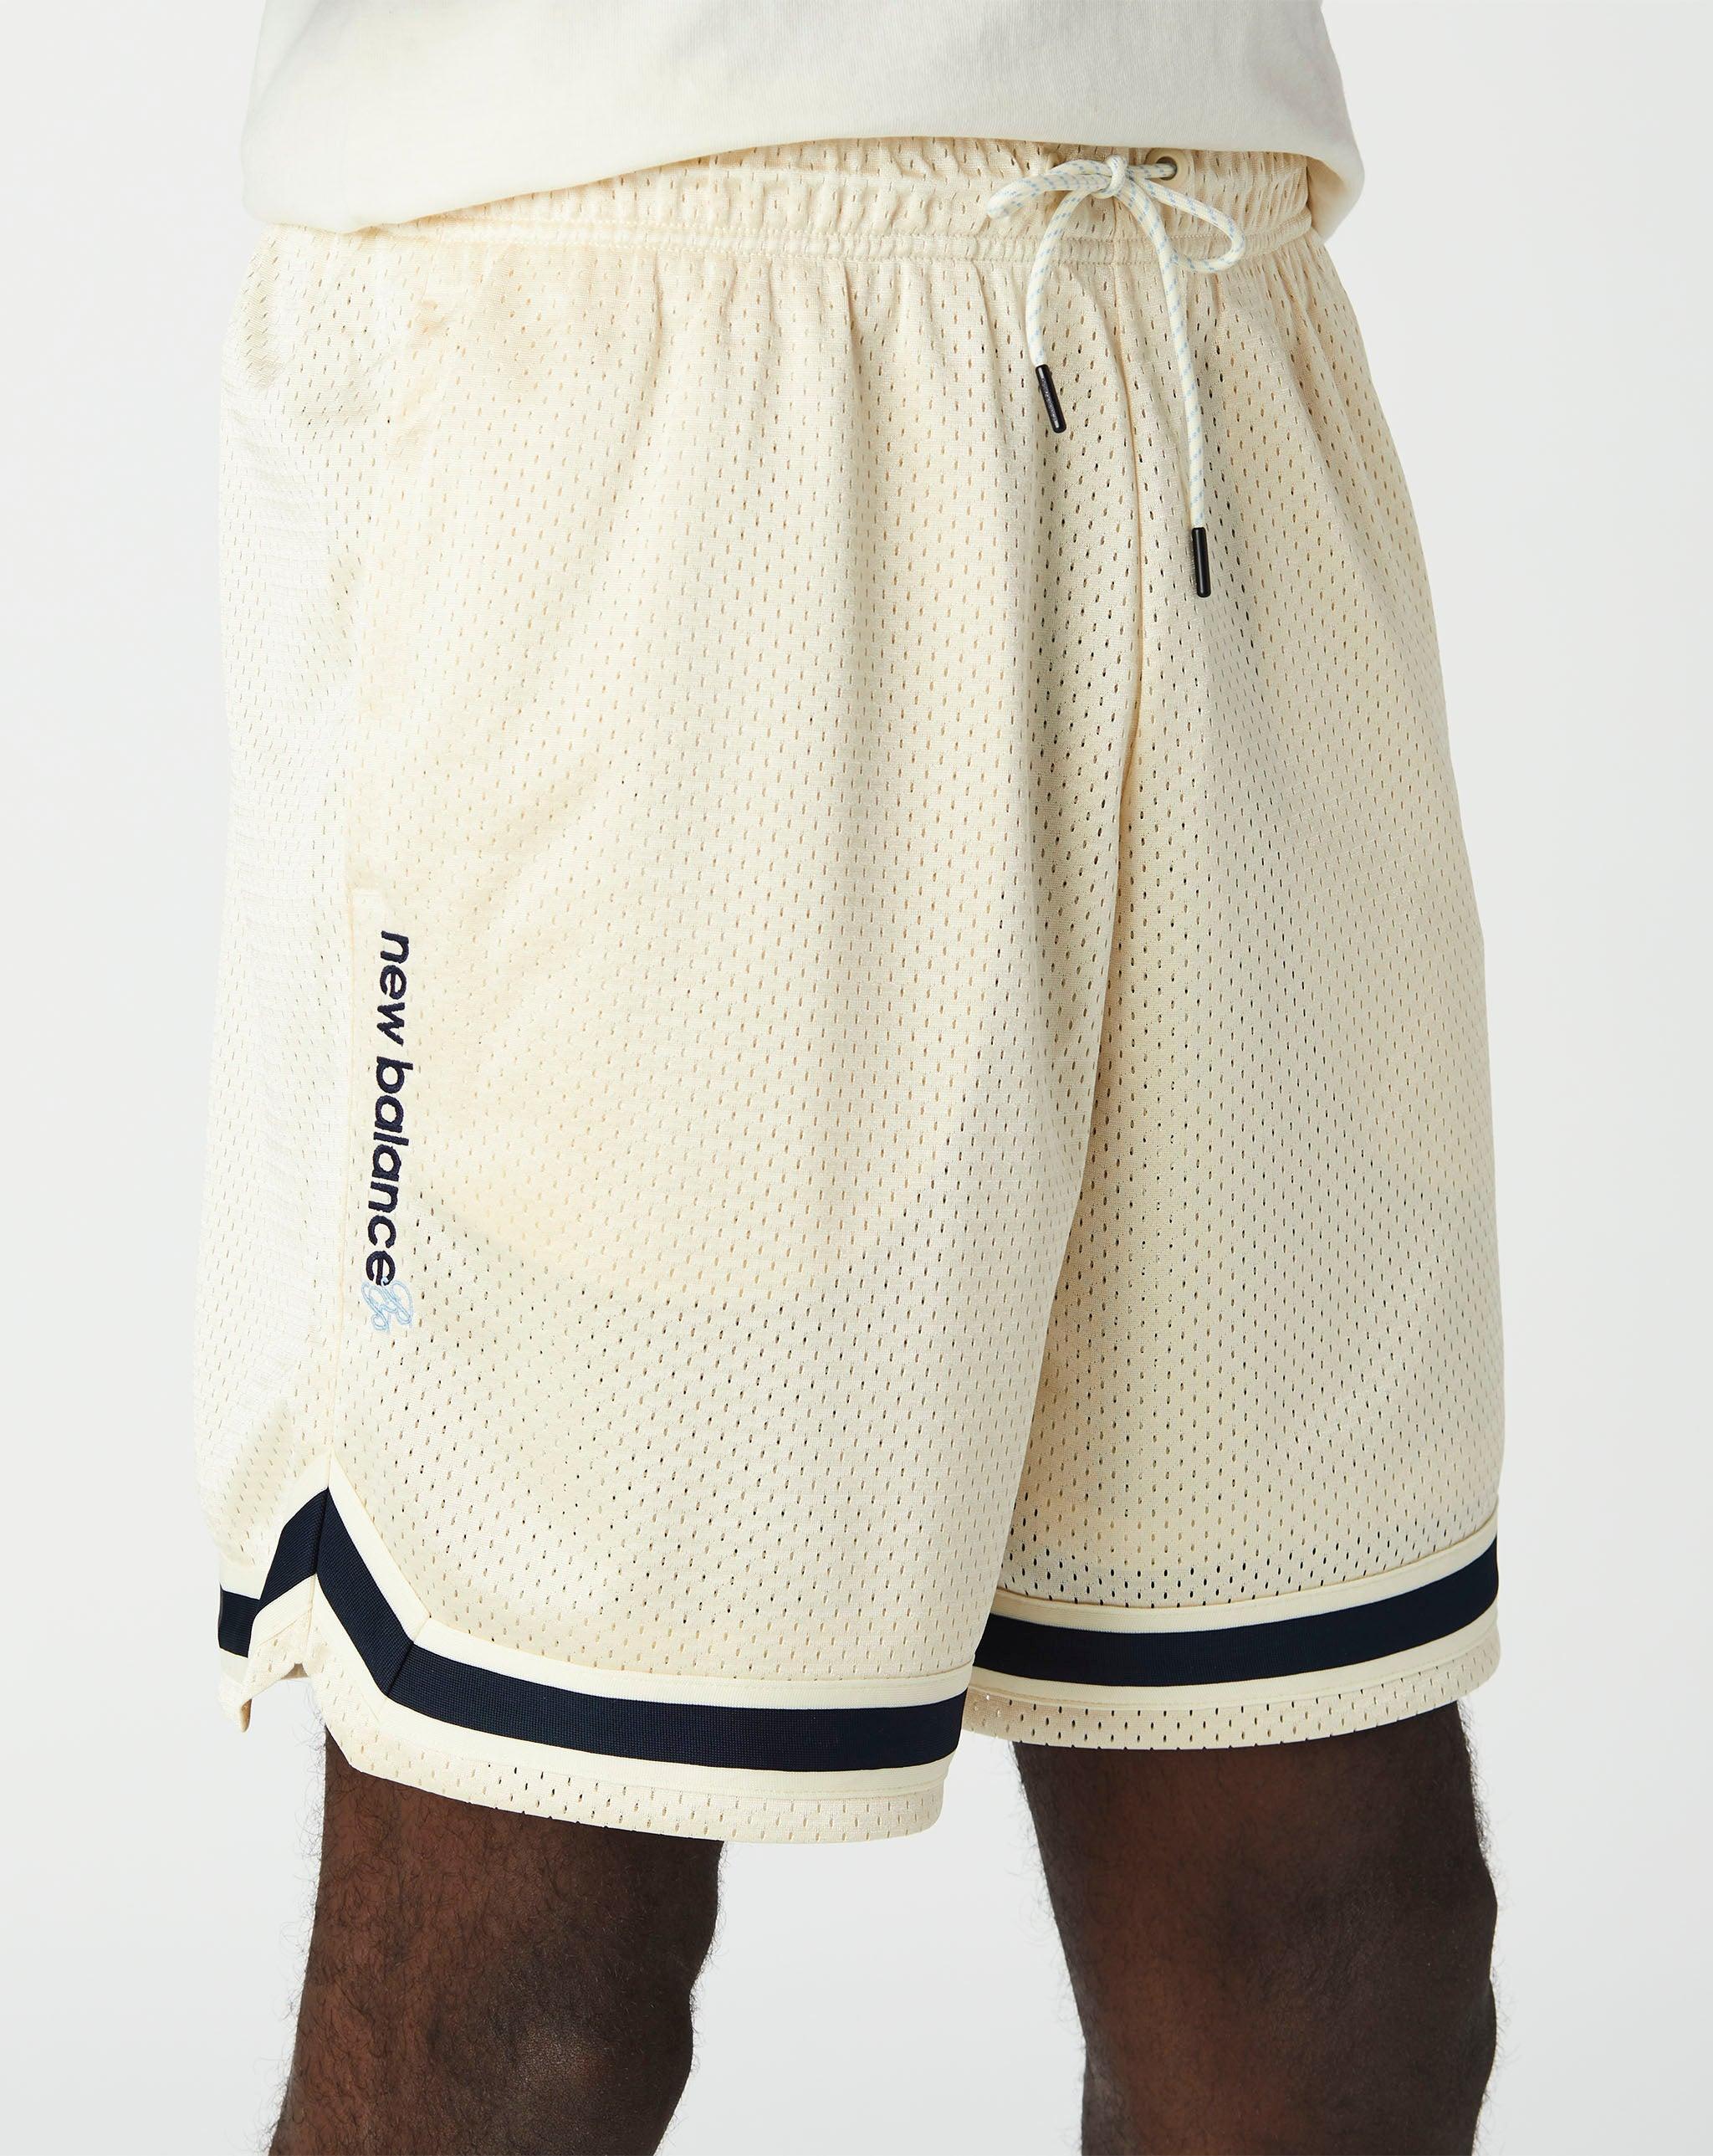 New Balance Rich Paul X Shorts in Cream (Natural) for Men | Lyst